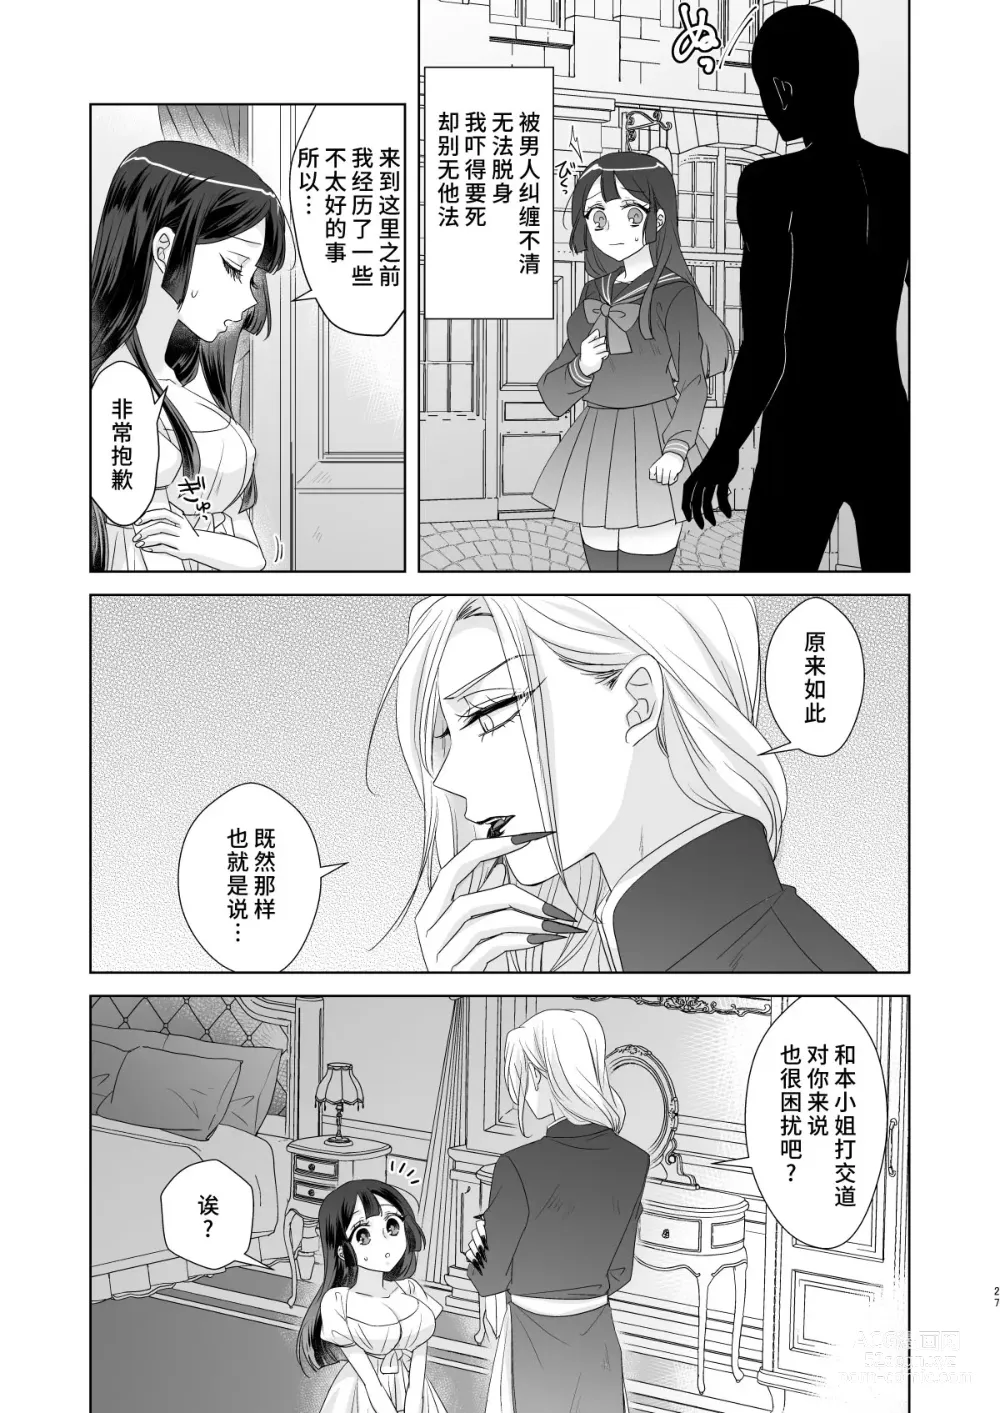 Page 26 of doujinshi 男大姐♂吸血鬼和少女